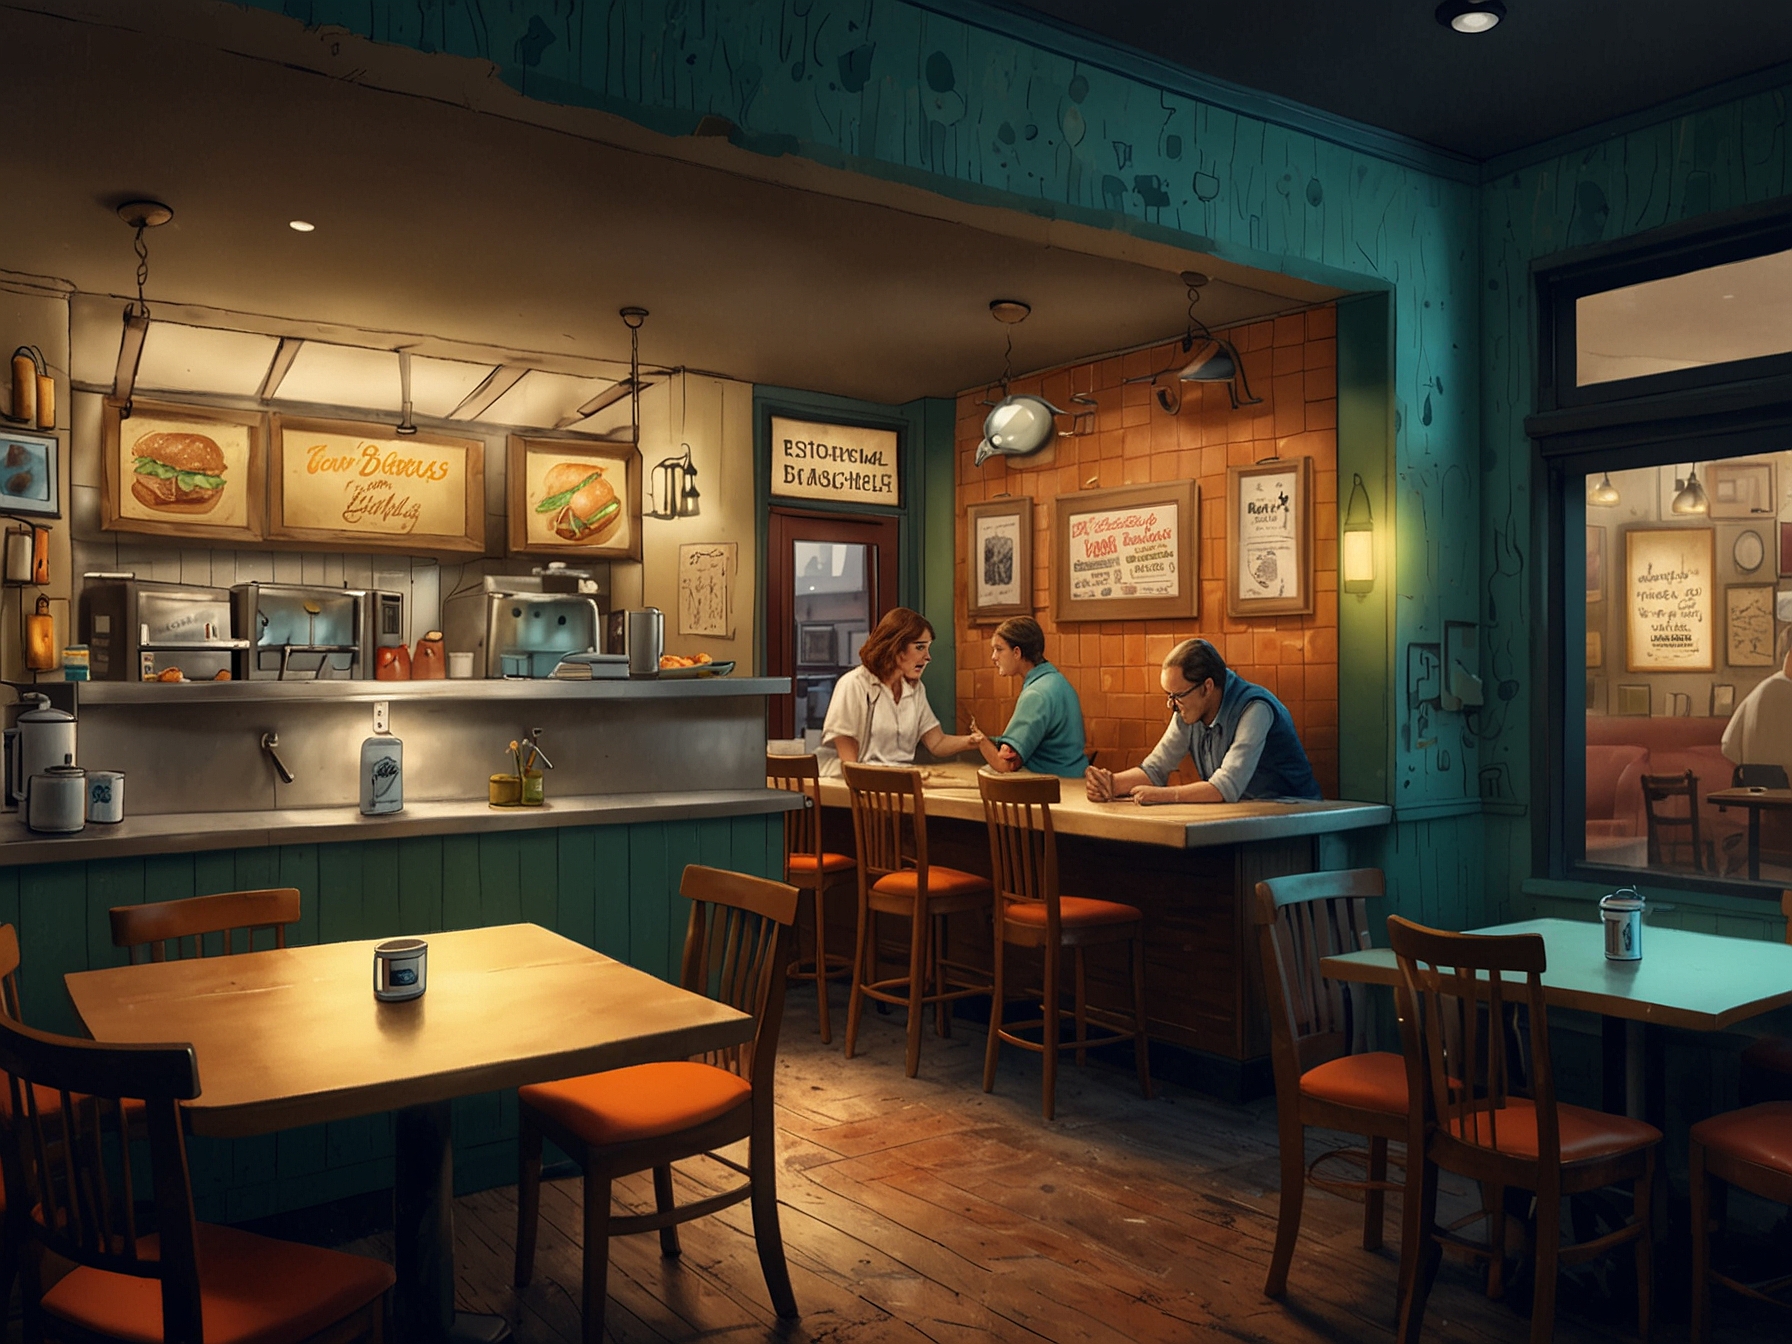 The transformation of a modest sandwich shop into a fine dining restaurant, illustrating the socio-economic shift and ambition that drives the characters in 'The Bear.'